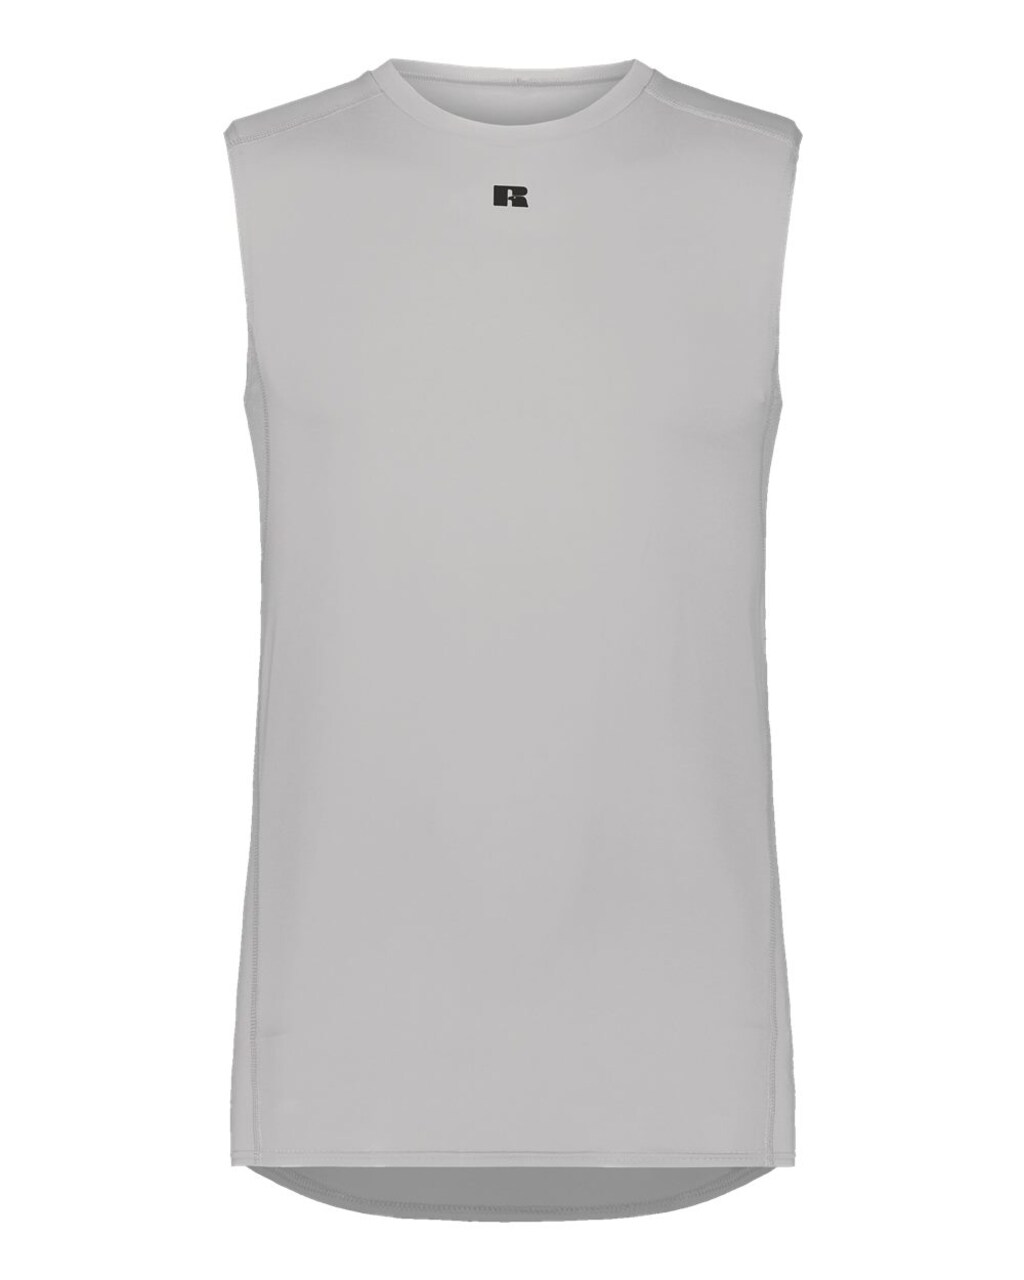 Up To 84% Off on Women's Slim Compression Tank